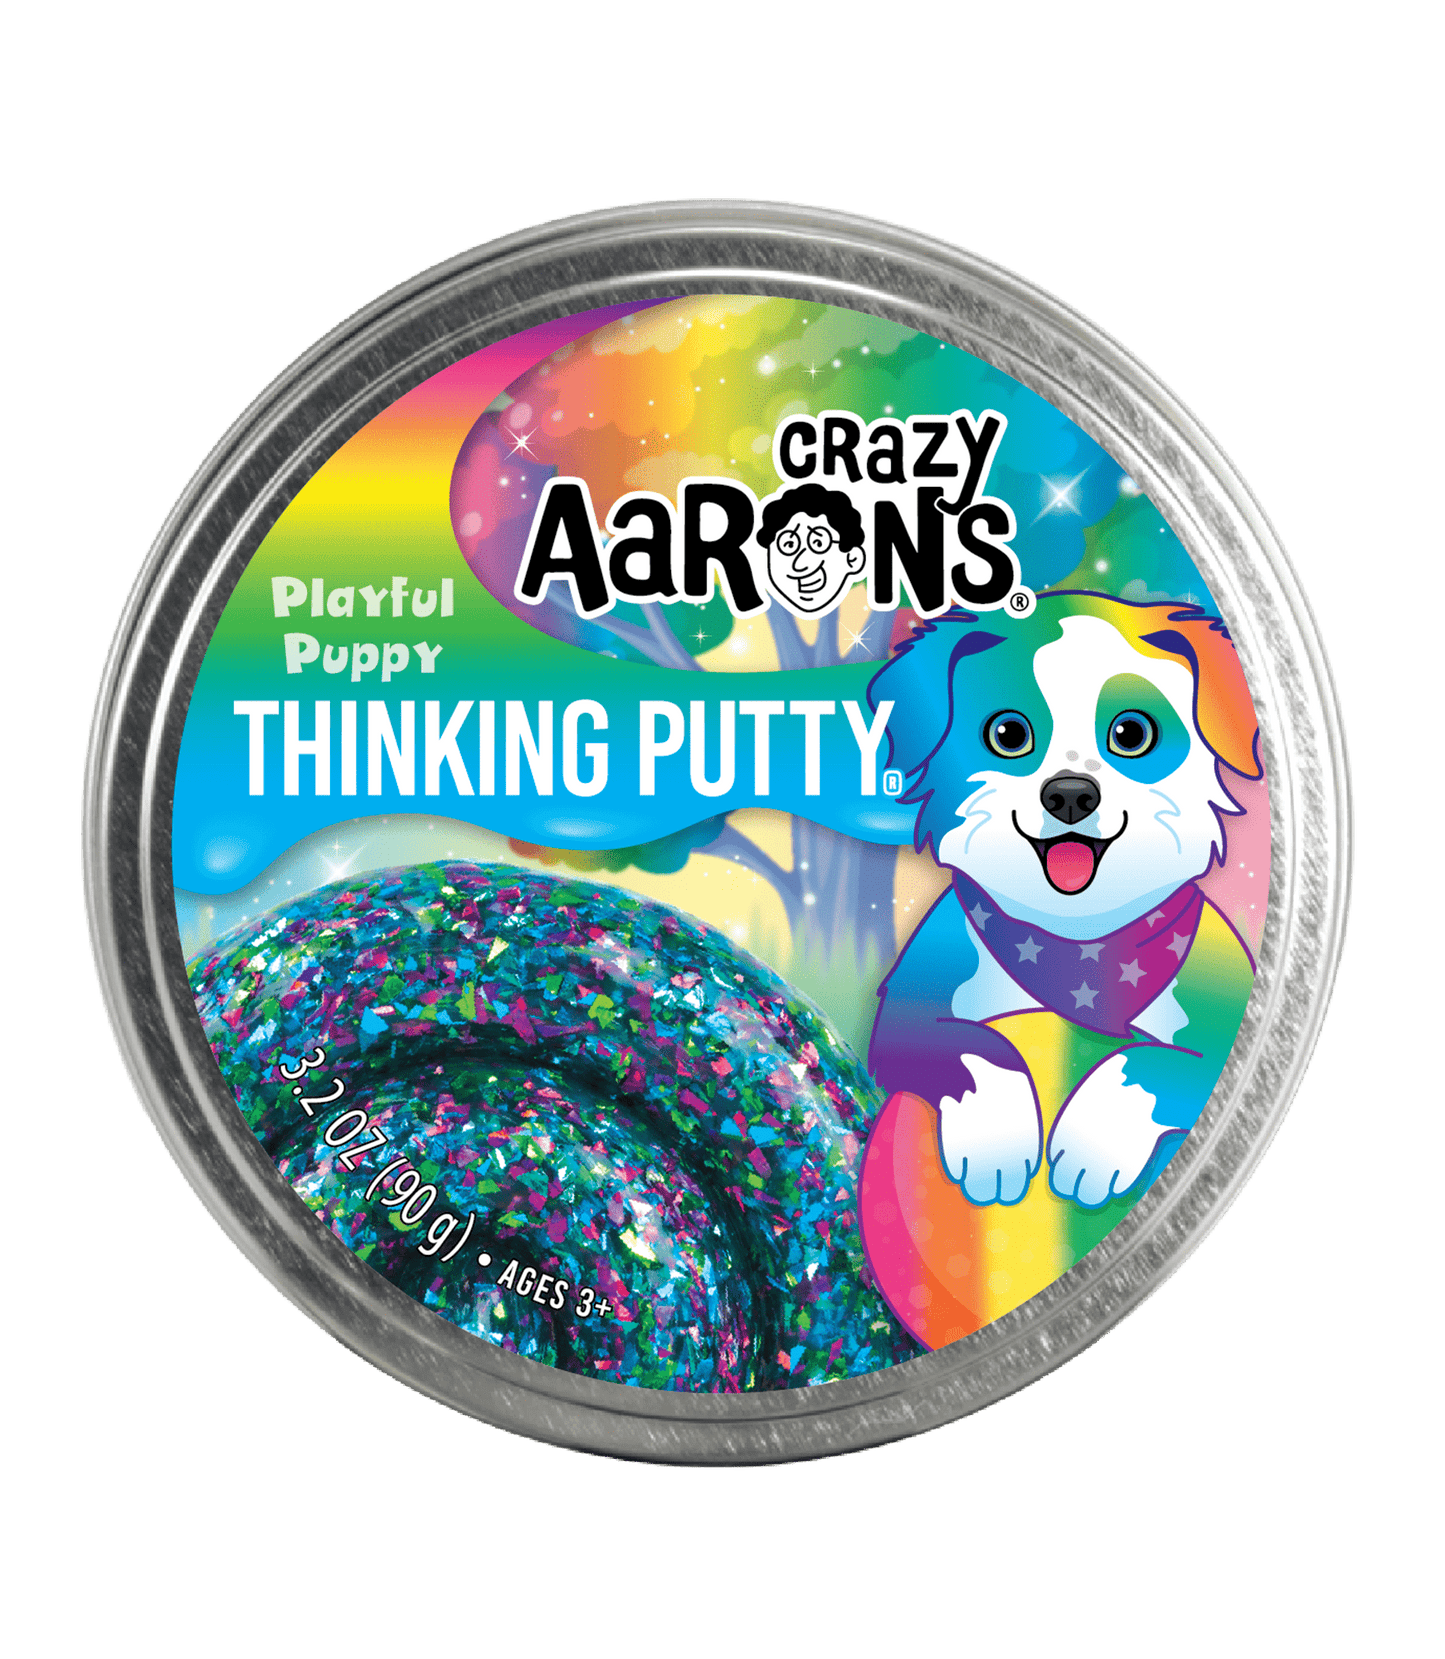 Crazy Aaron's Putty Pets PLAYFUL PUPPY